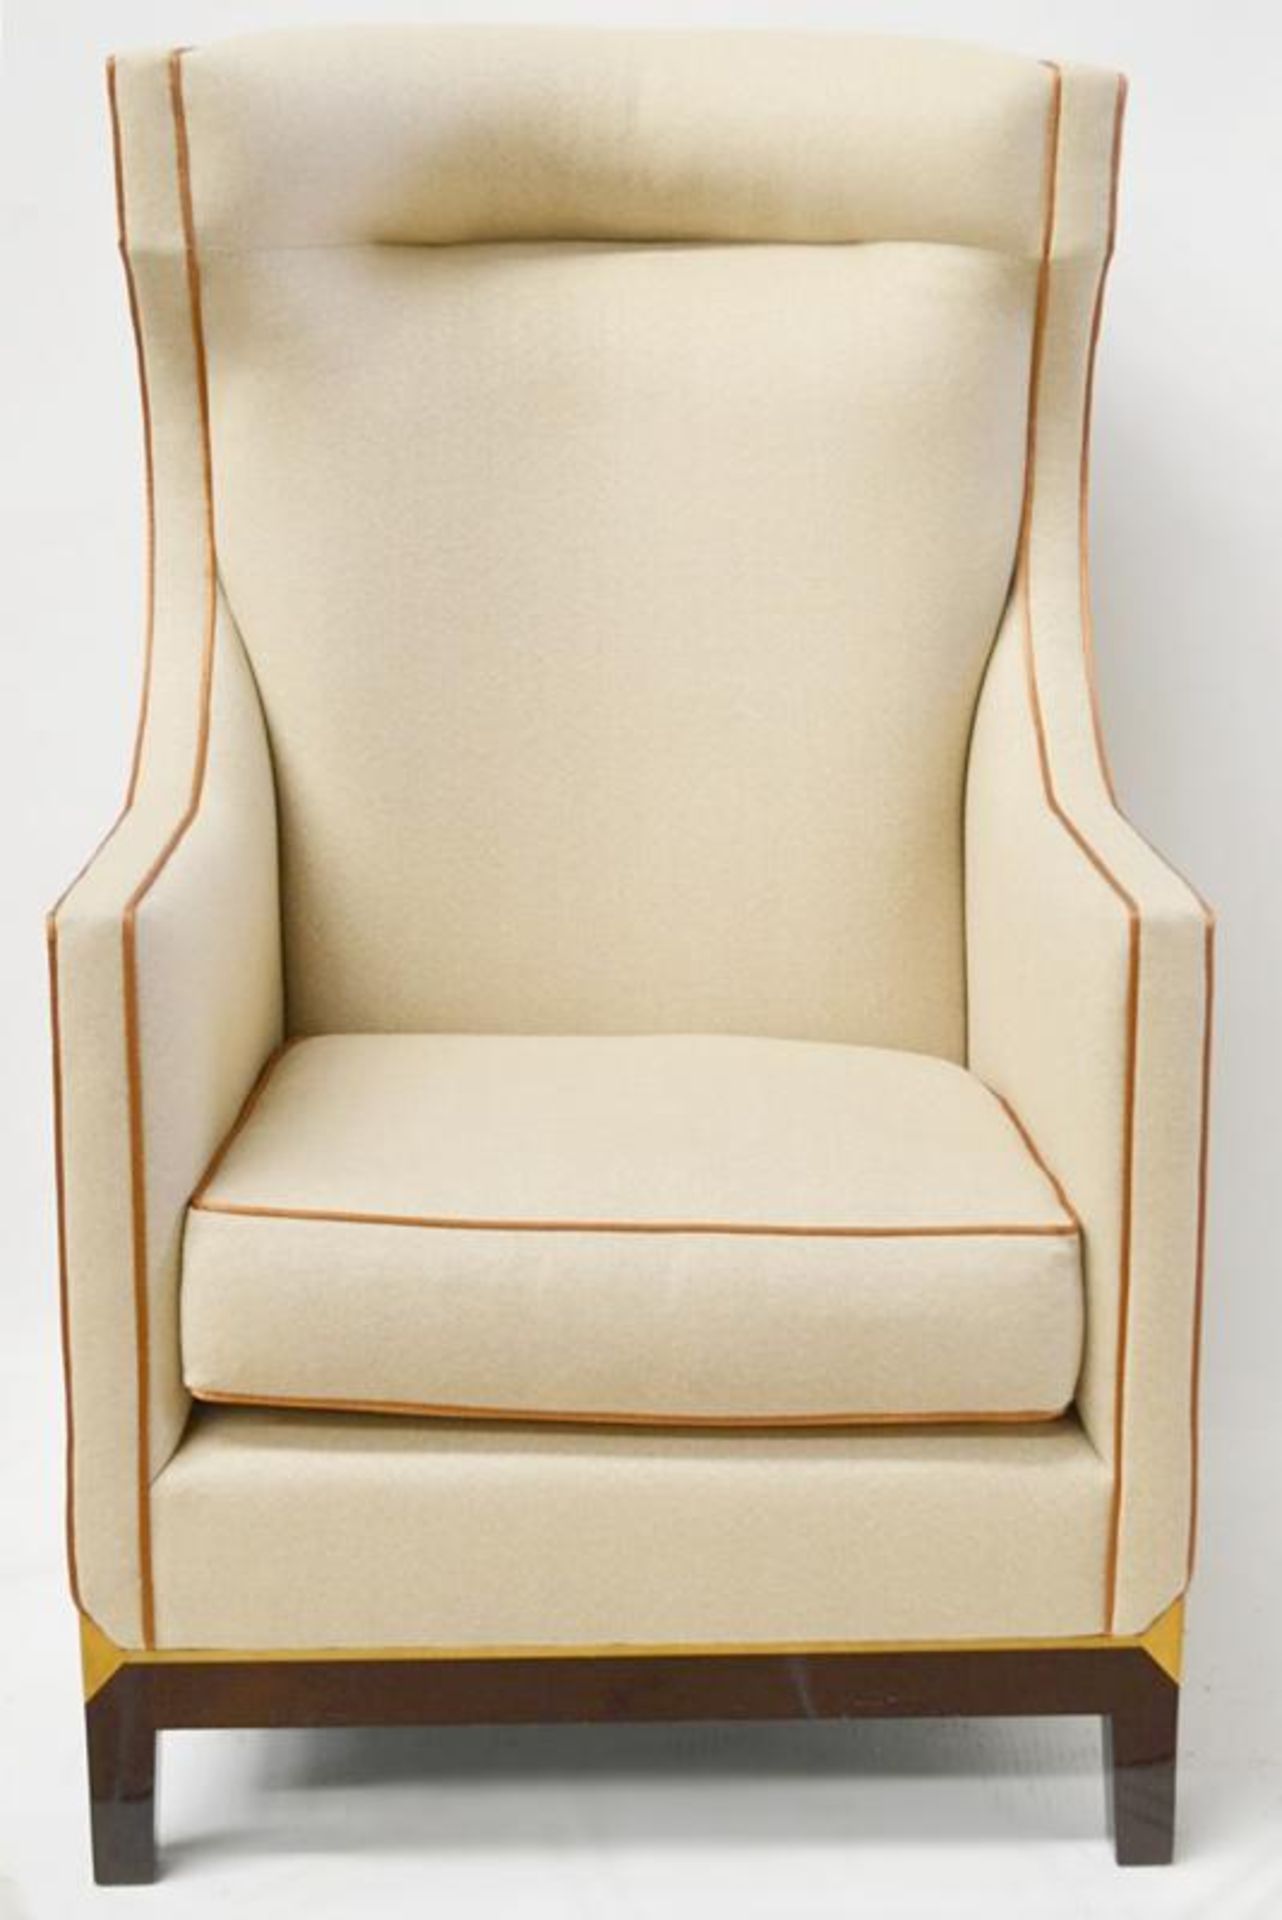 1 x Artistic Upholstery Ltd 'Burlington' Wing Back Chair With Matching Stool - RRP £7,358.00 - Image 10 of 10